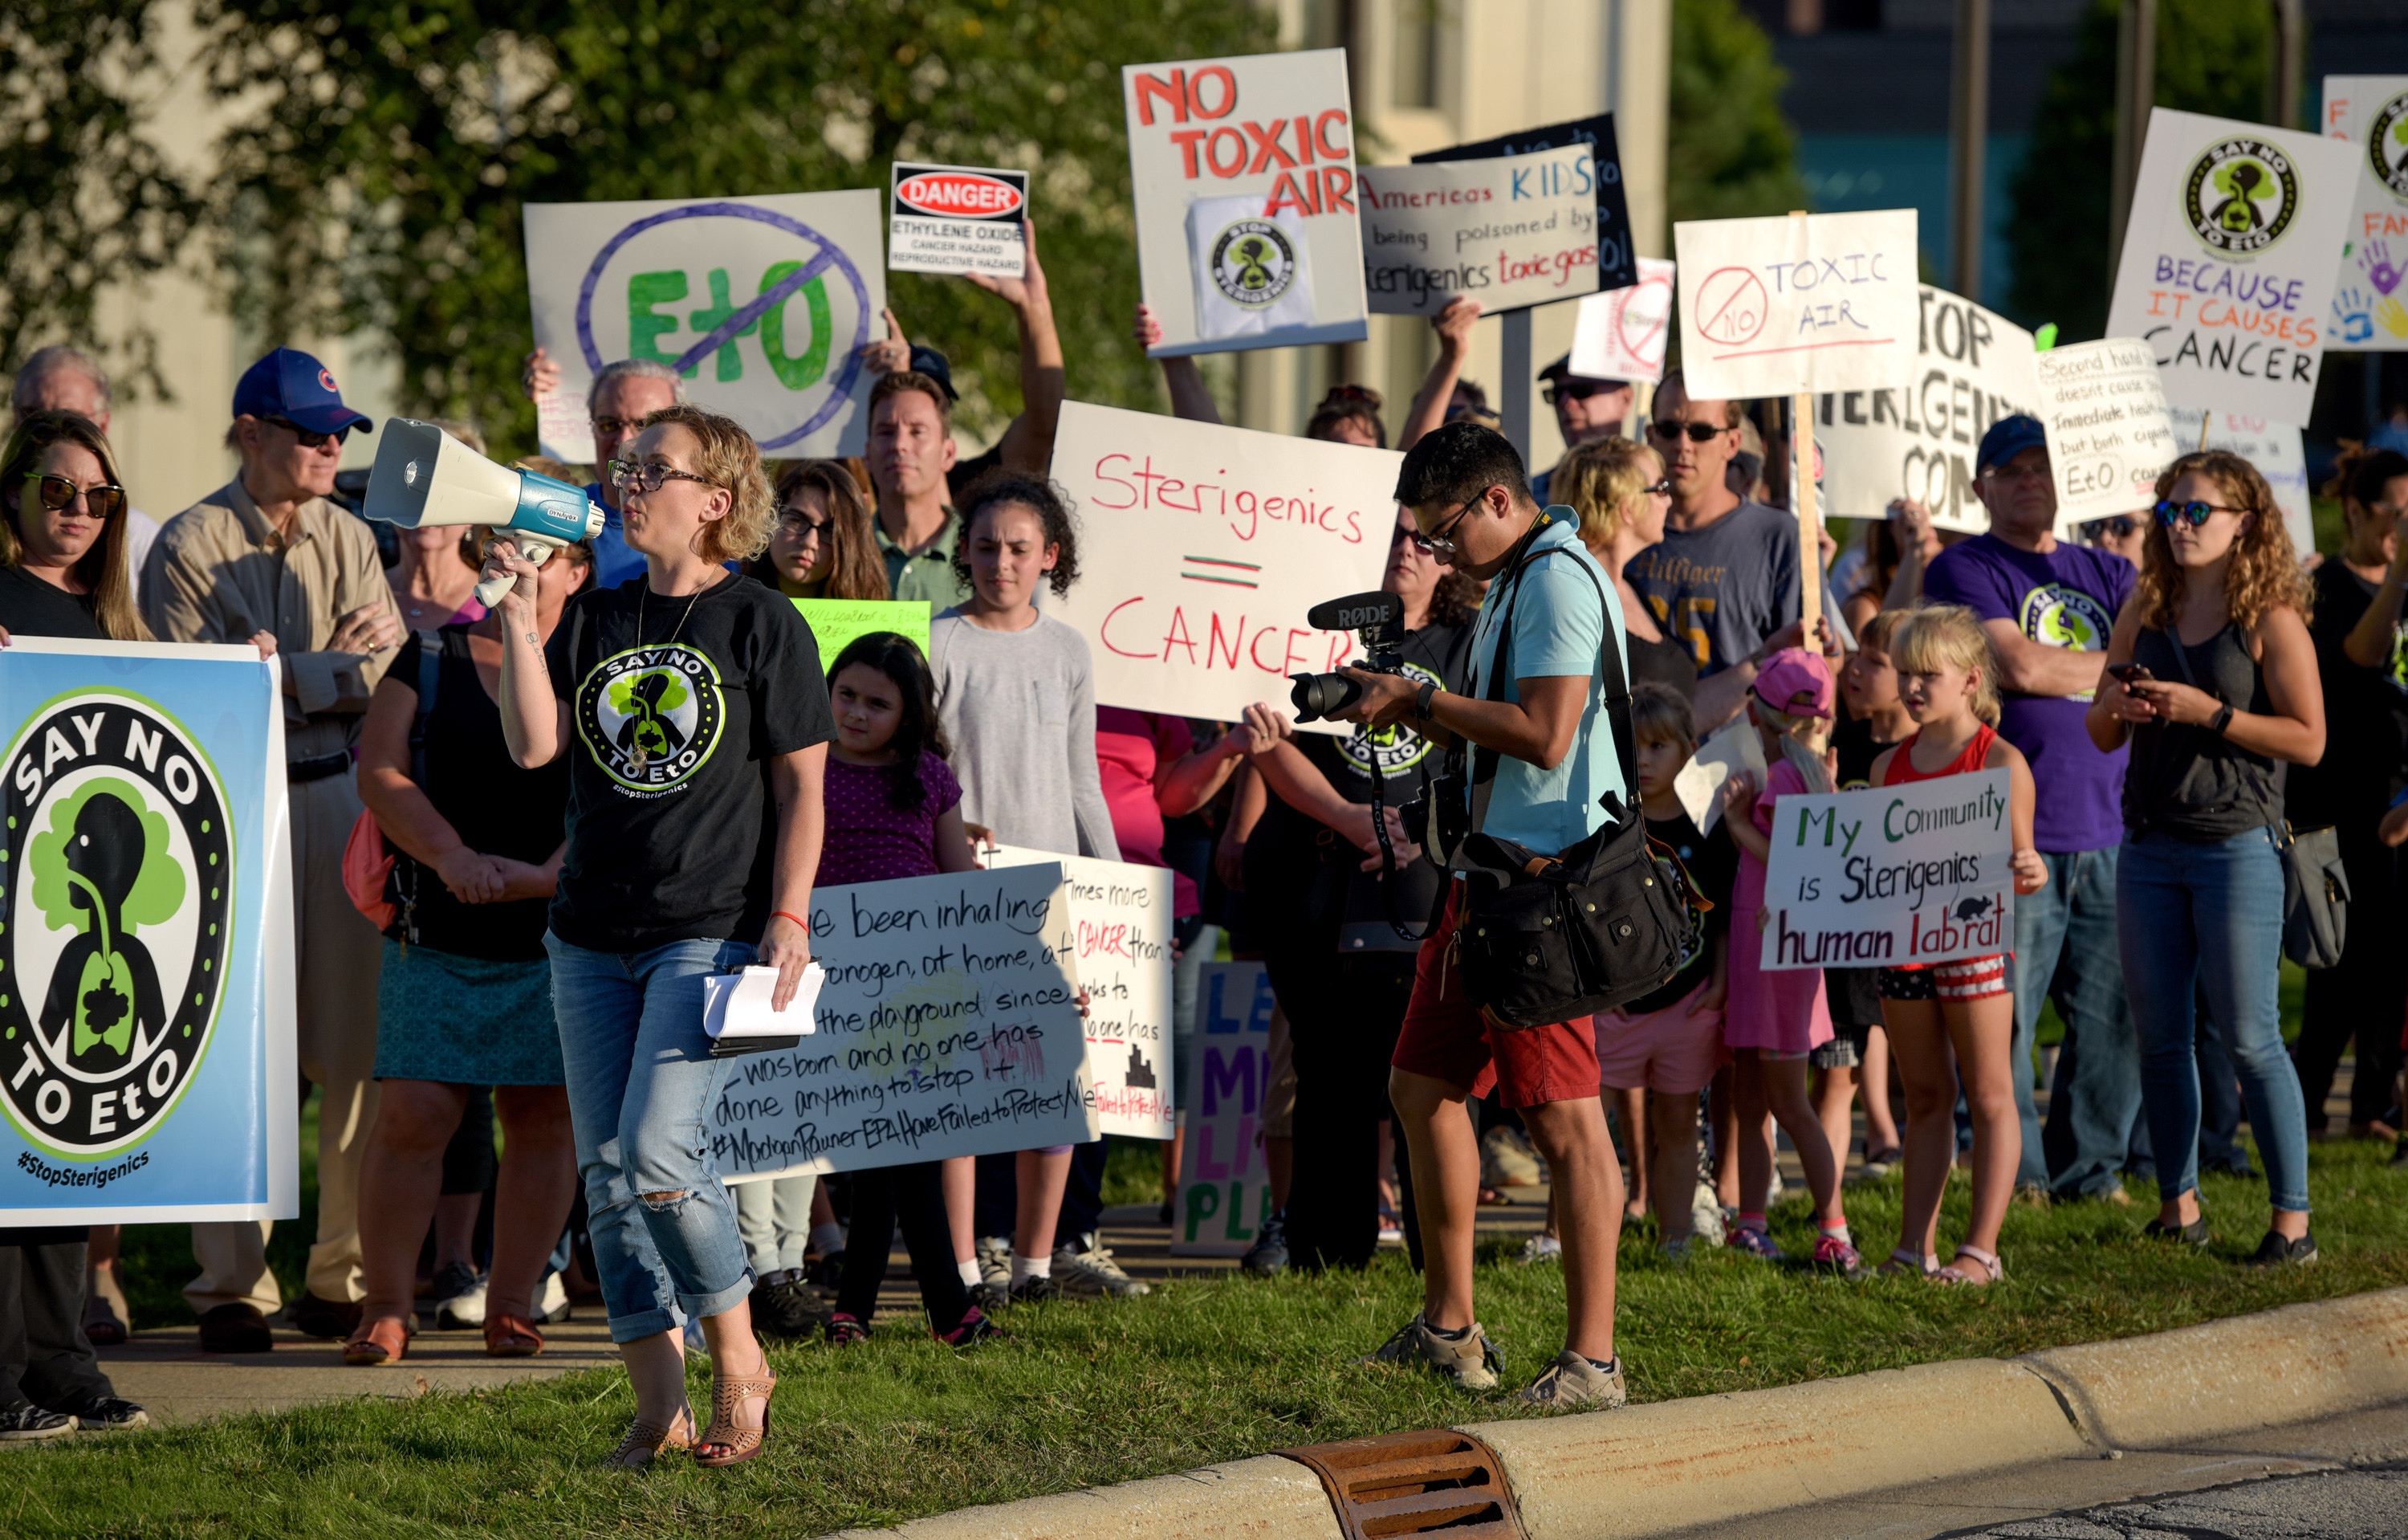 Protest organizer Neringa Zymancius of Darian leads the protesters in a chant in front of the Oak Brook headquarters of Sterigenics Friday, Sept. 14, 2018 in Oak Brook, Ill. Sterigenics uses ethylene oxide gas in nearby Willowbrook to sterilize items as part of their business. (Mark Black/Chicago Tribune/TNS via Getty Images)